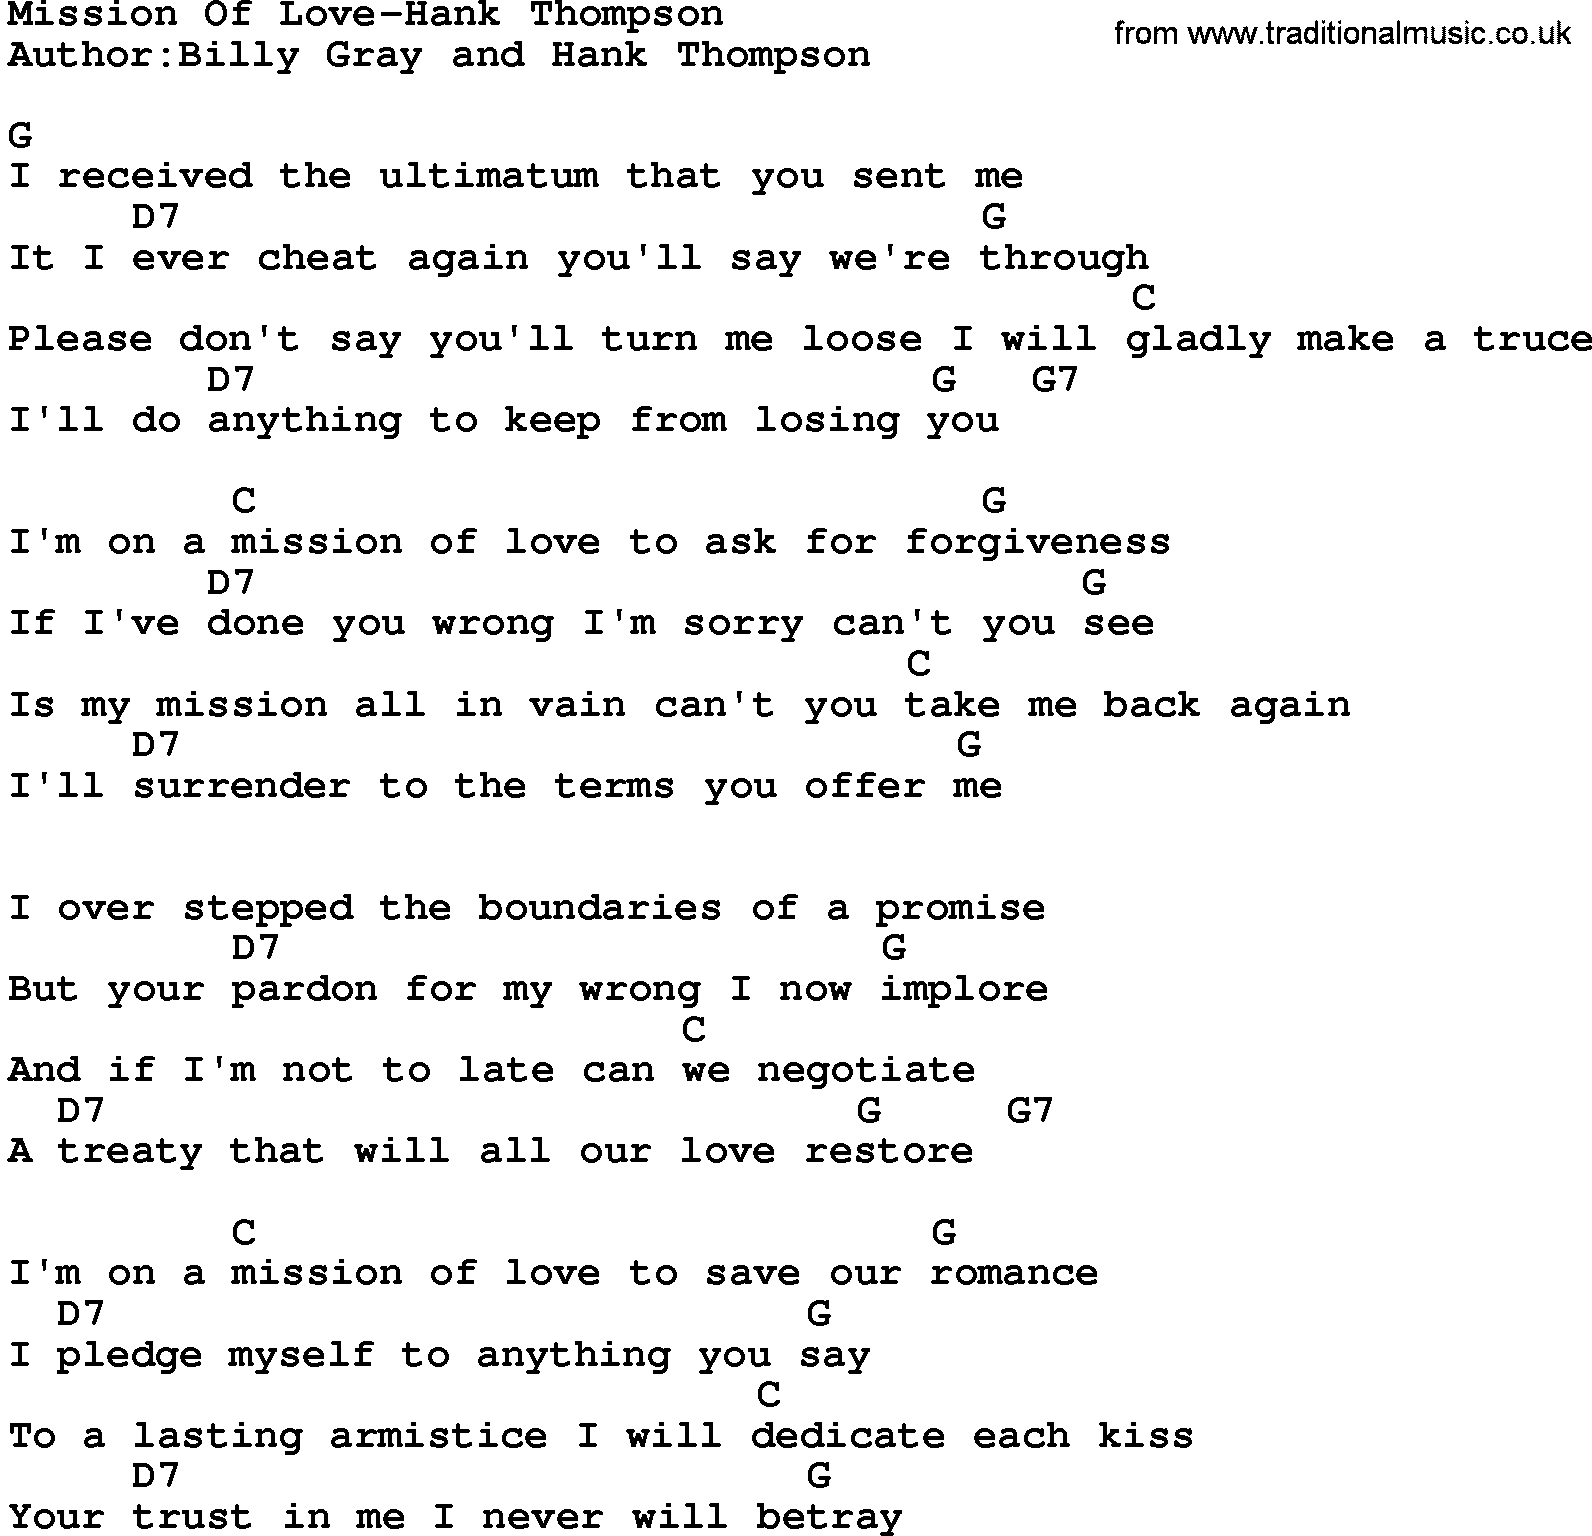 Country music song: Mission Of Love-Hank Thompson lyrics and chords